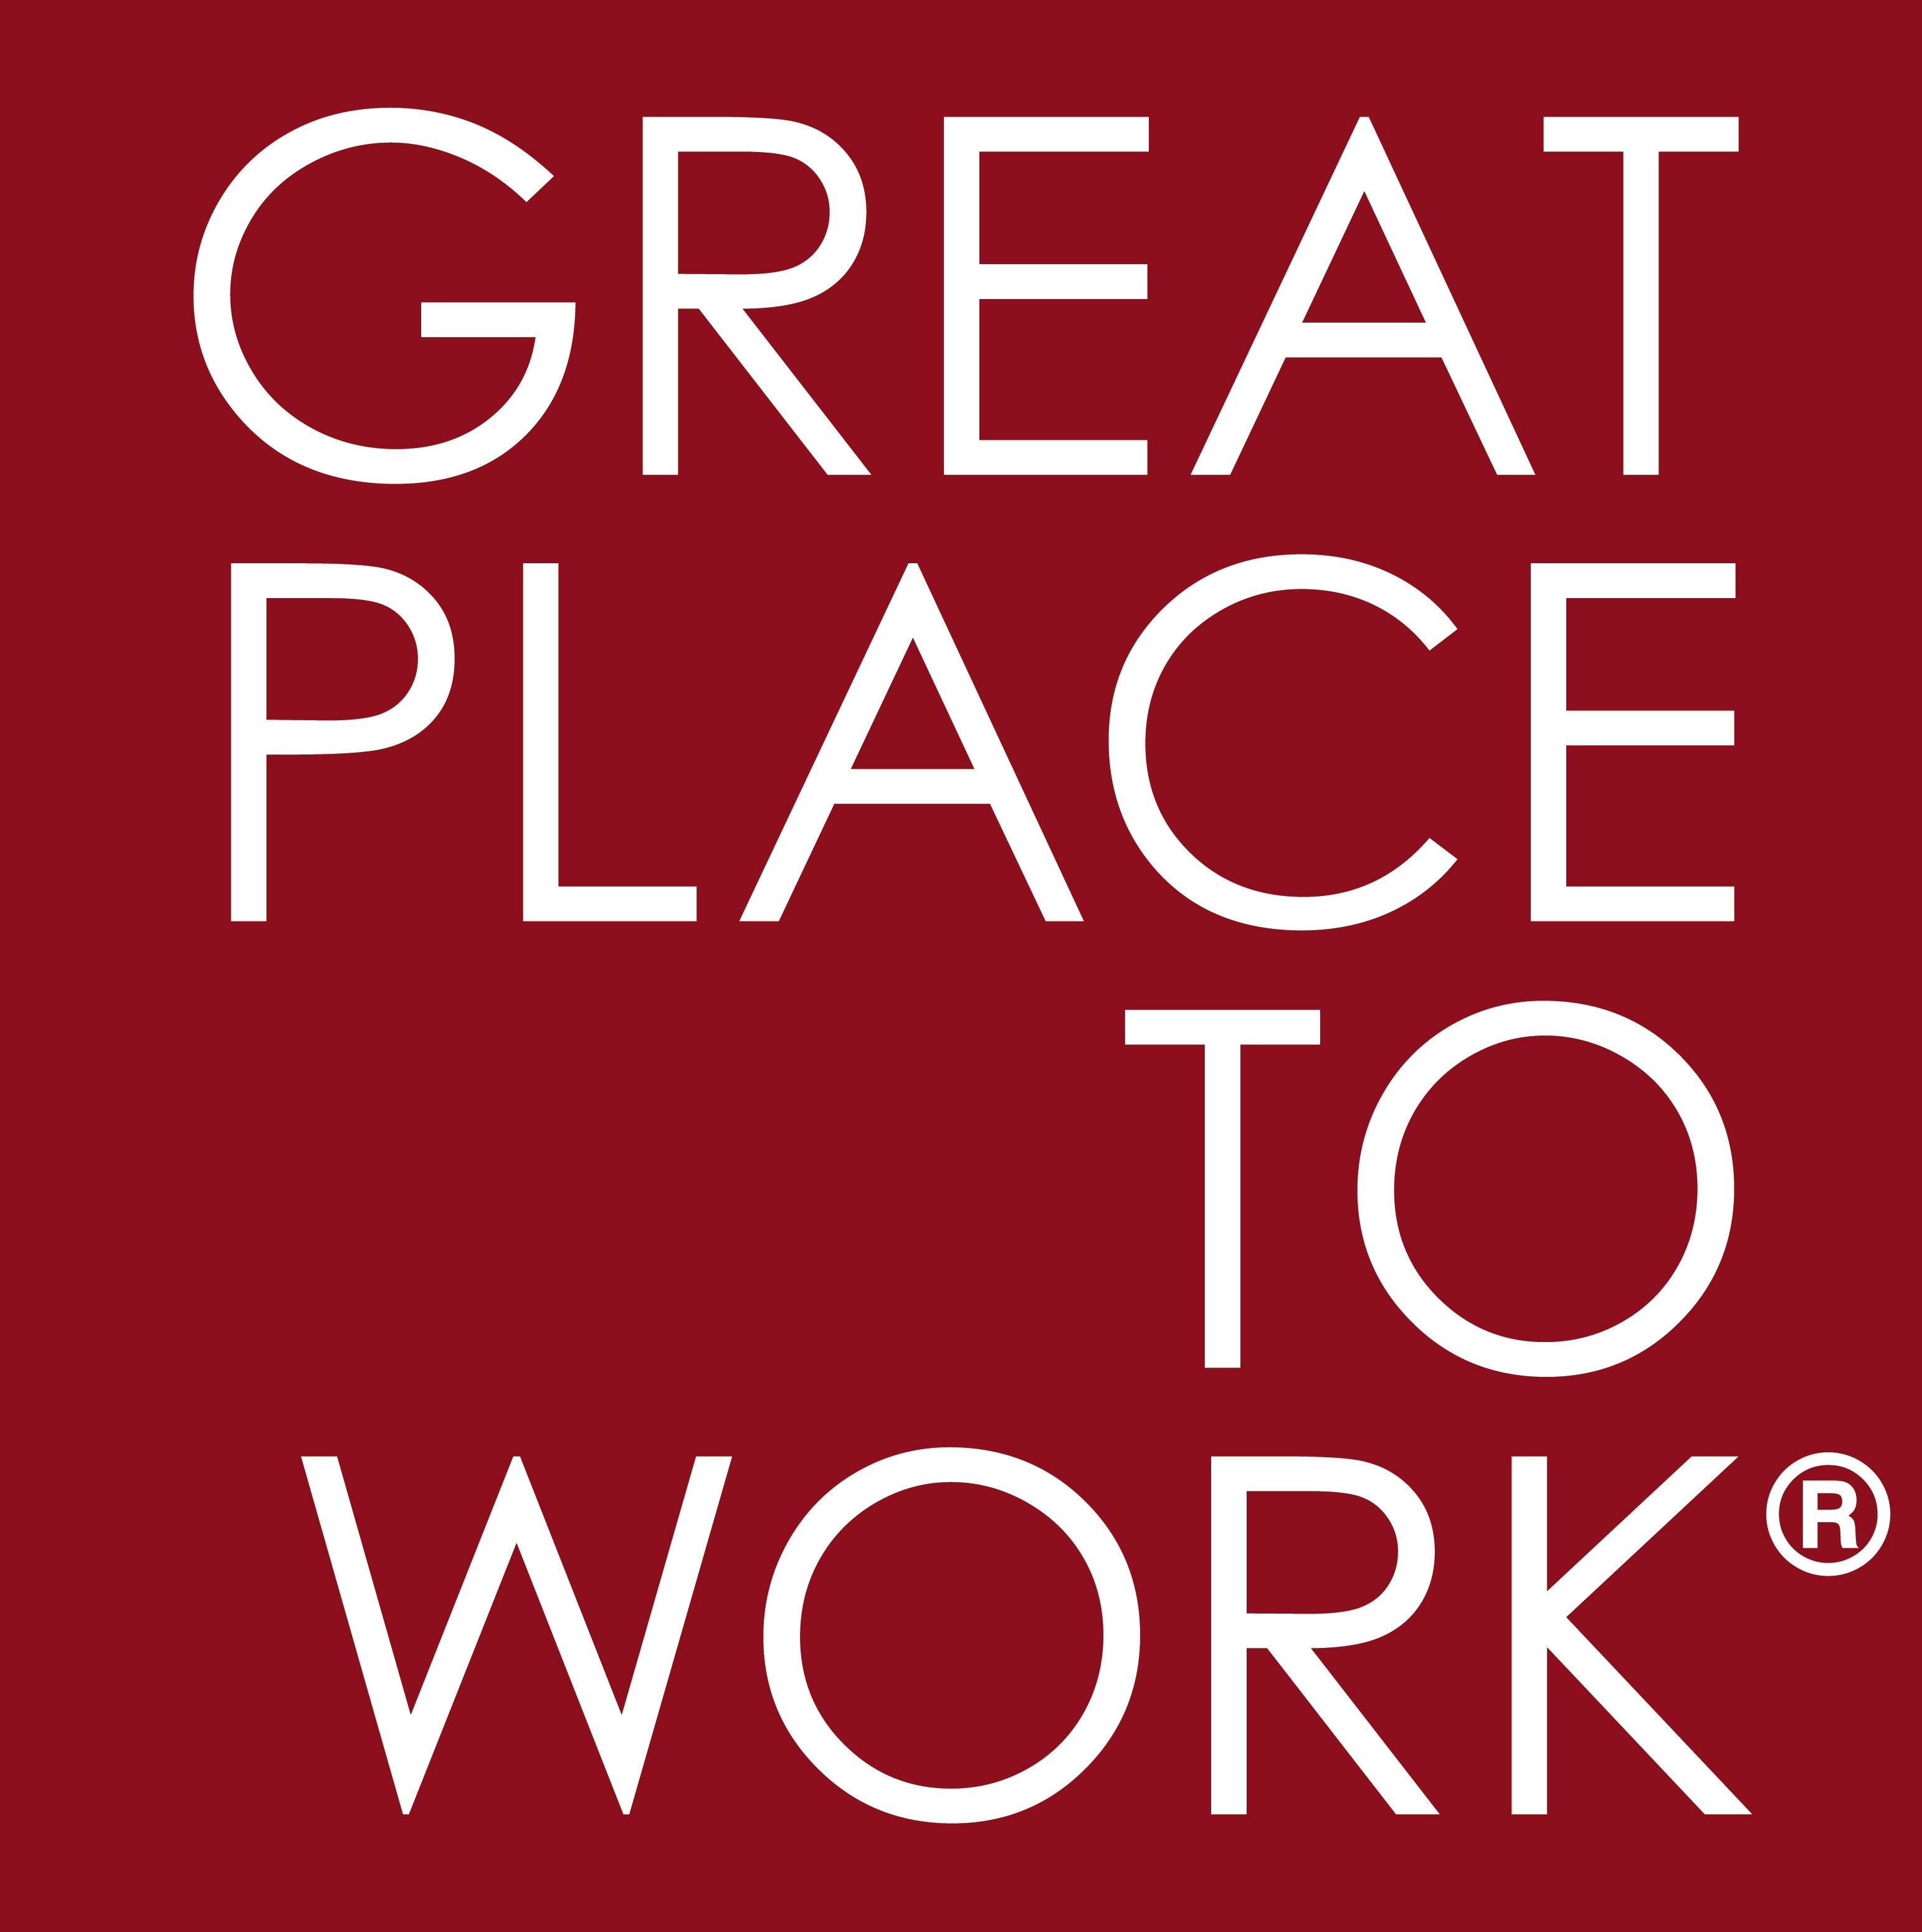 A Great Place To Work - Innovation 360 Group AB